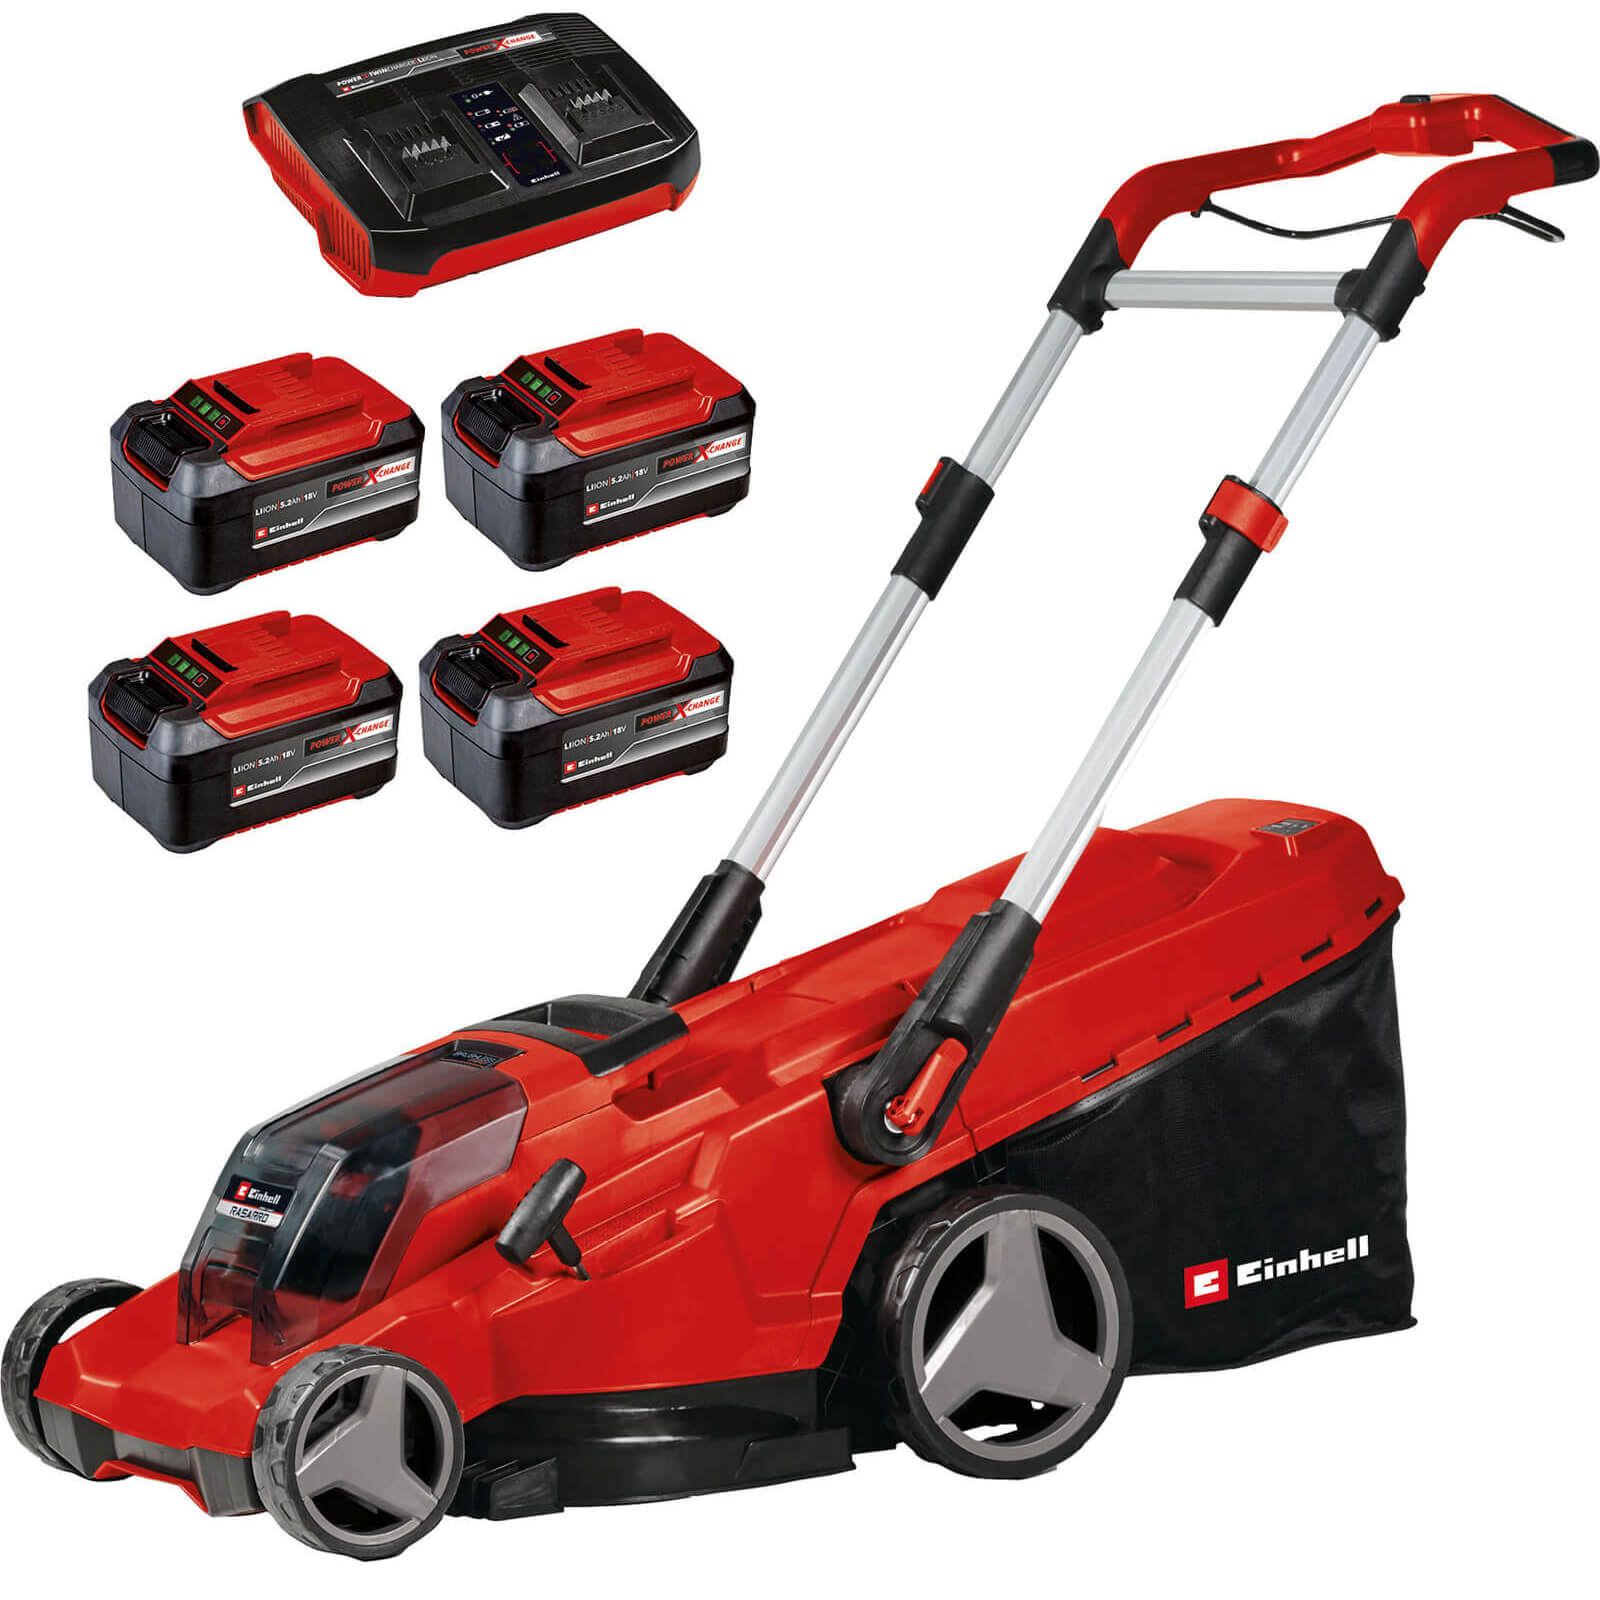 Image of Einhell RASARRO 36/42 36v Cordless Brushless Rotary Lawnmower 420mm 4 x 5.2ah Li-ion Twin Battery Charger